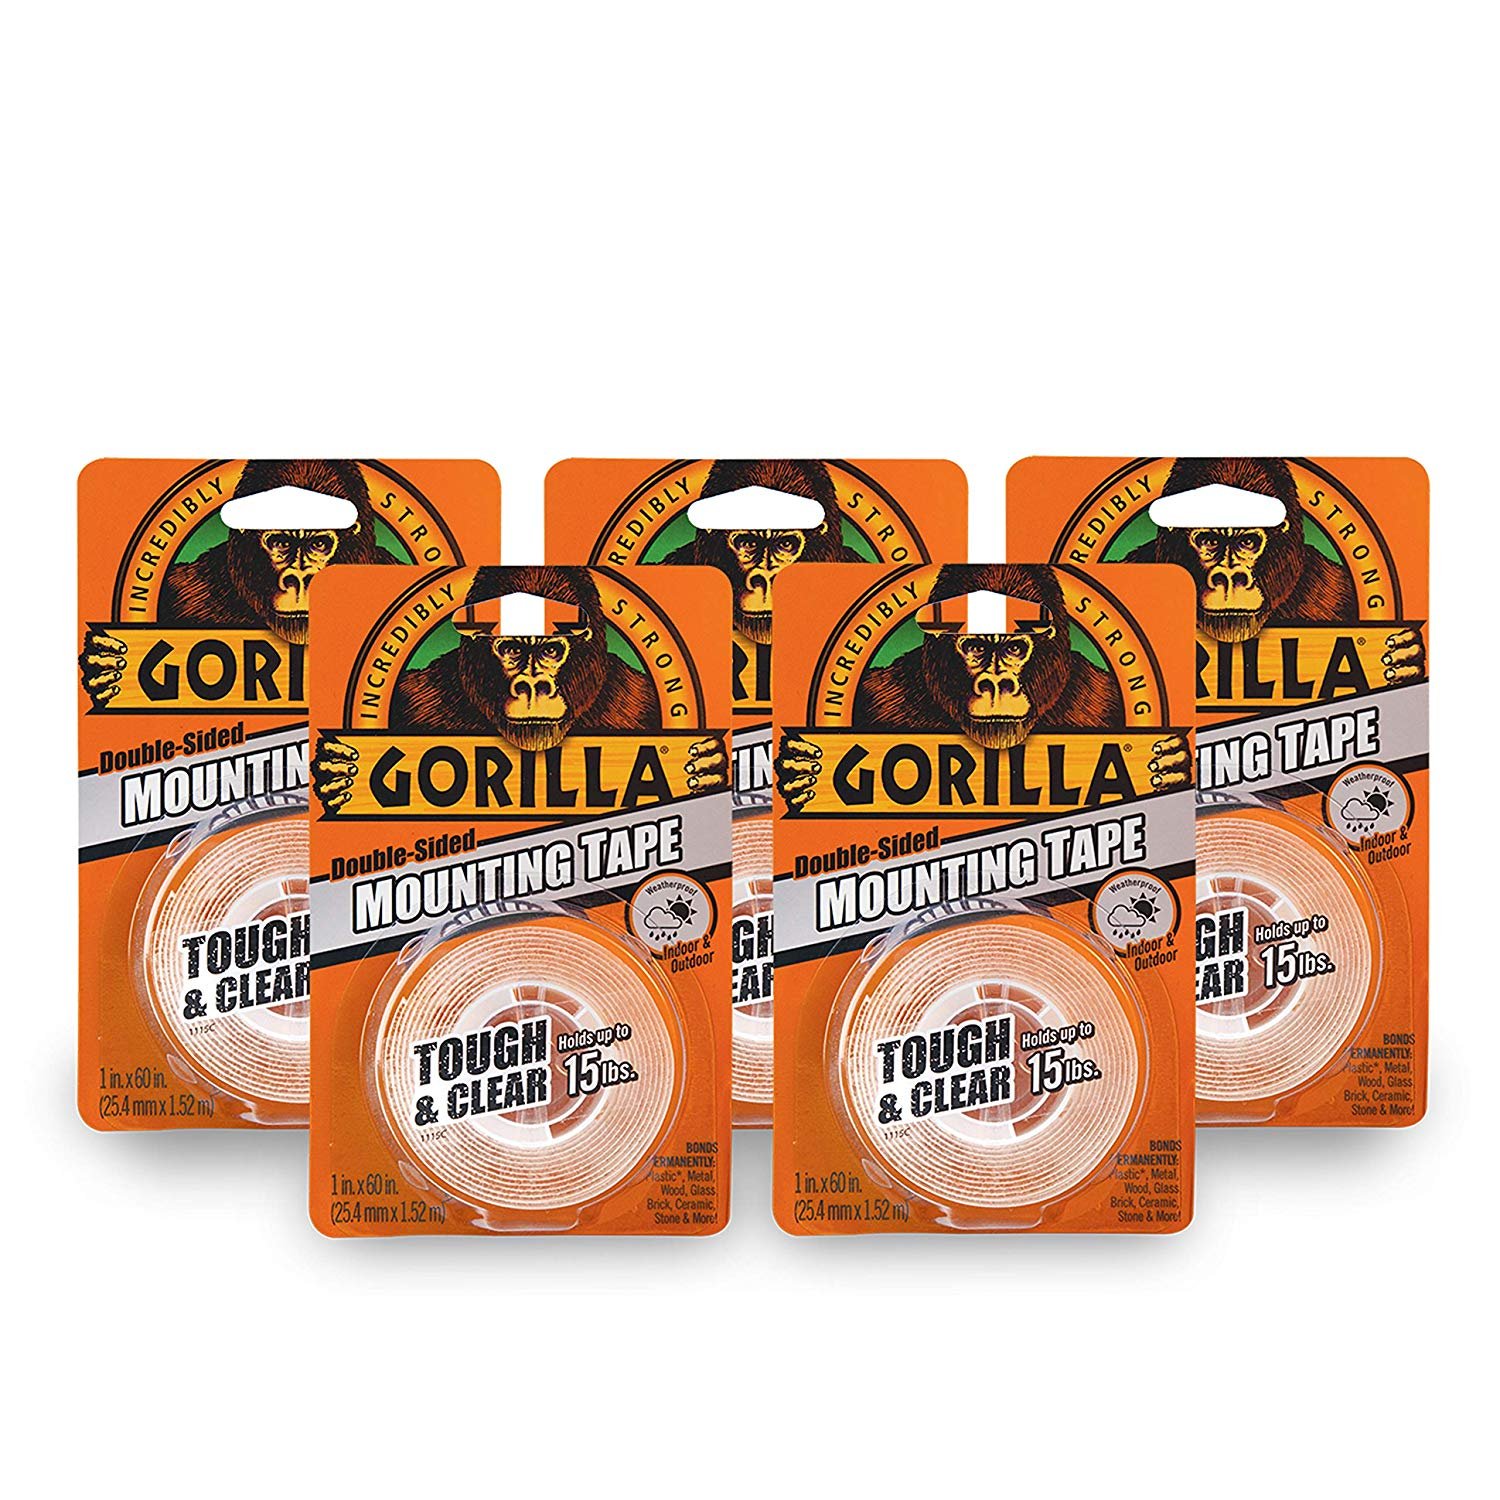 Gorilla 6065003 Double Sided Mounting Tape Tough & Clear 1 in. x 60 in. (Pack of 5) - image 1 of 8